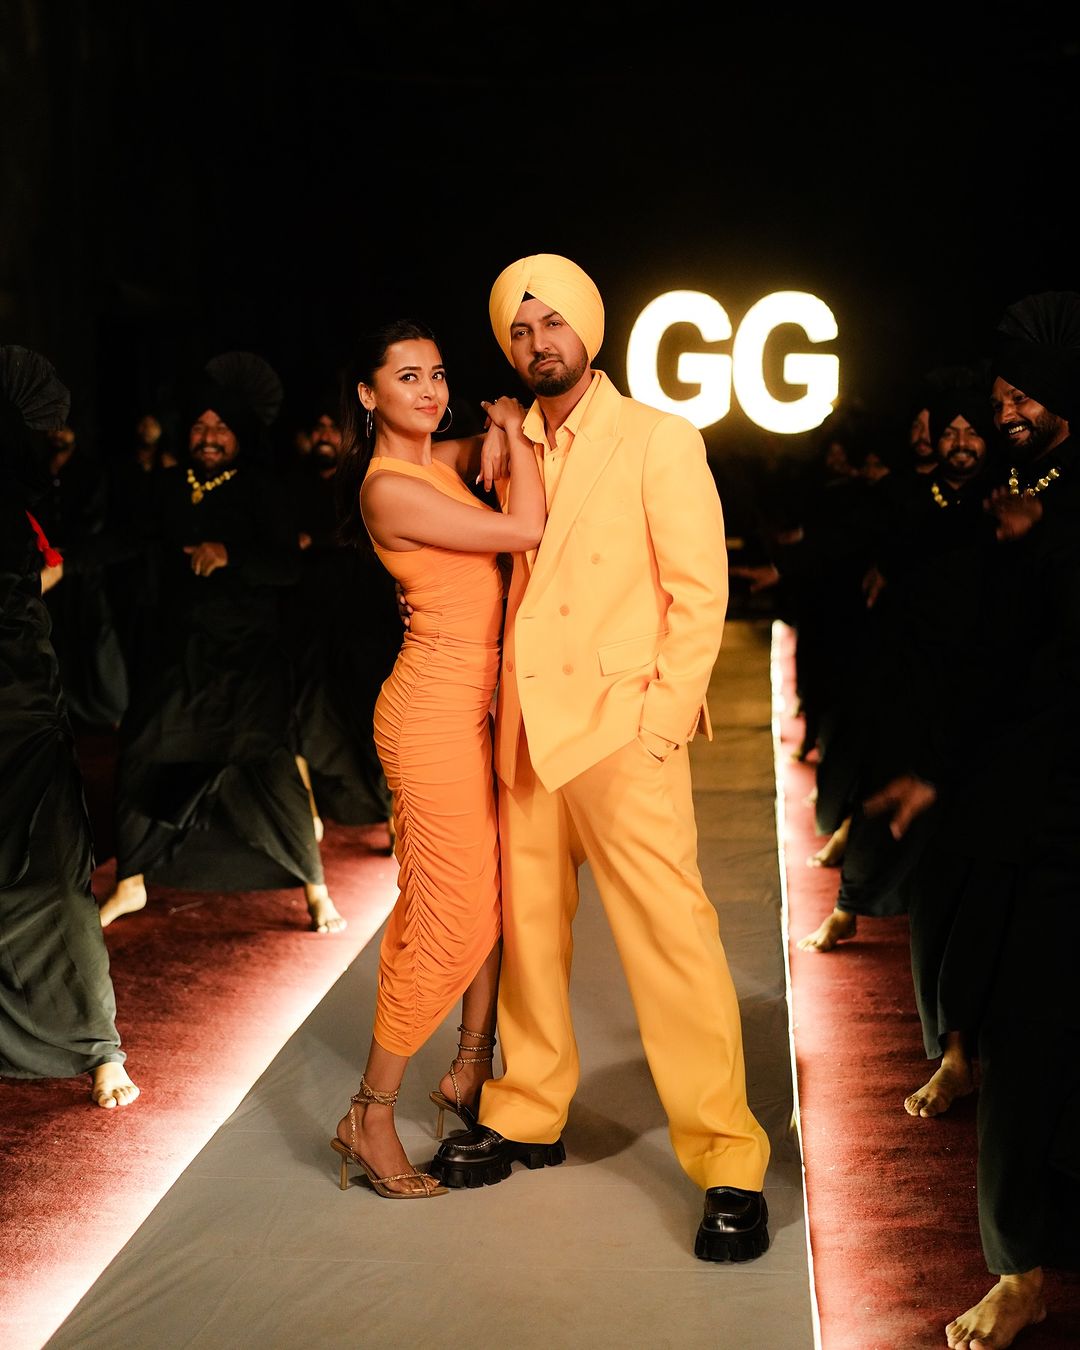 A surprising announcement from Tejasswi Prakash that she is about to collaborate with Gippy Grewal for a music video. Netizens are happier with this ‘Unexpected duo’